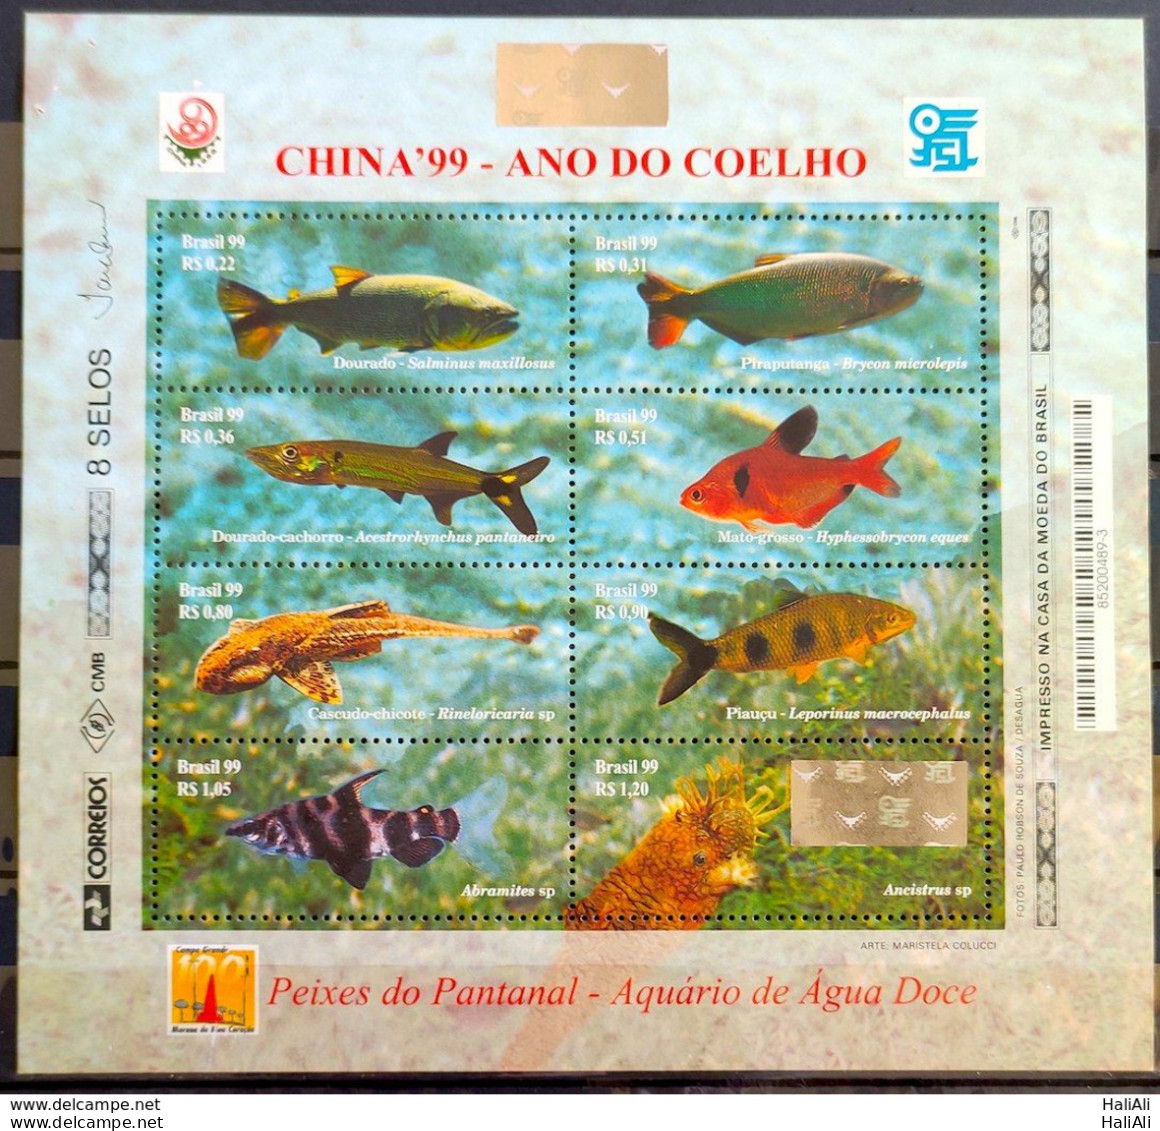 B 113 Brazil Stamp China Block Year Of The Rabbit Pisces Do Pantanal 1999 Clip Holes 2, Upper Left - Nuevos